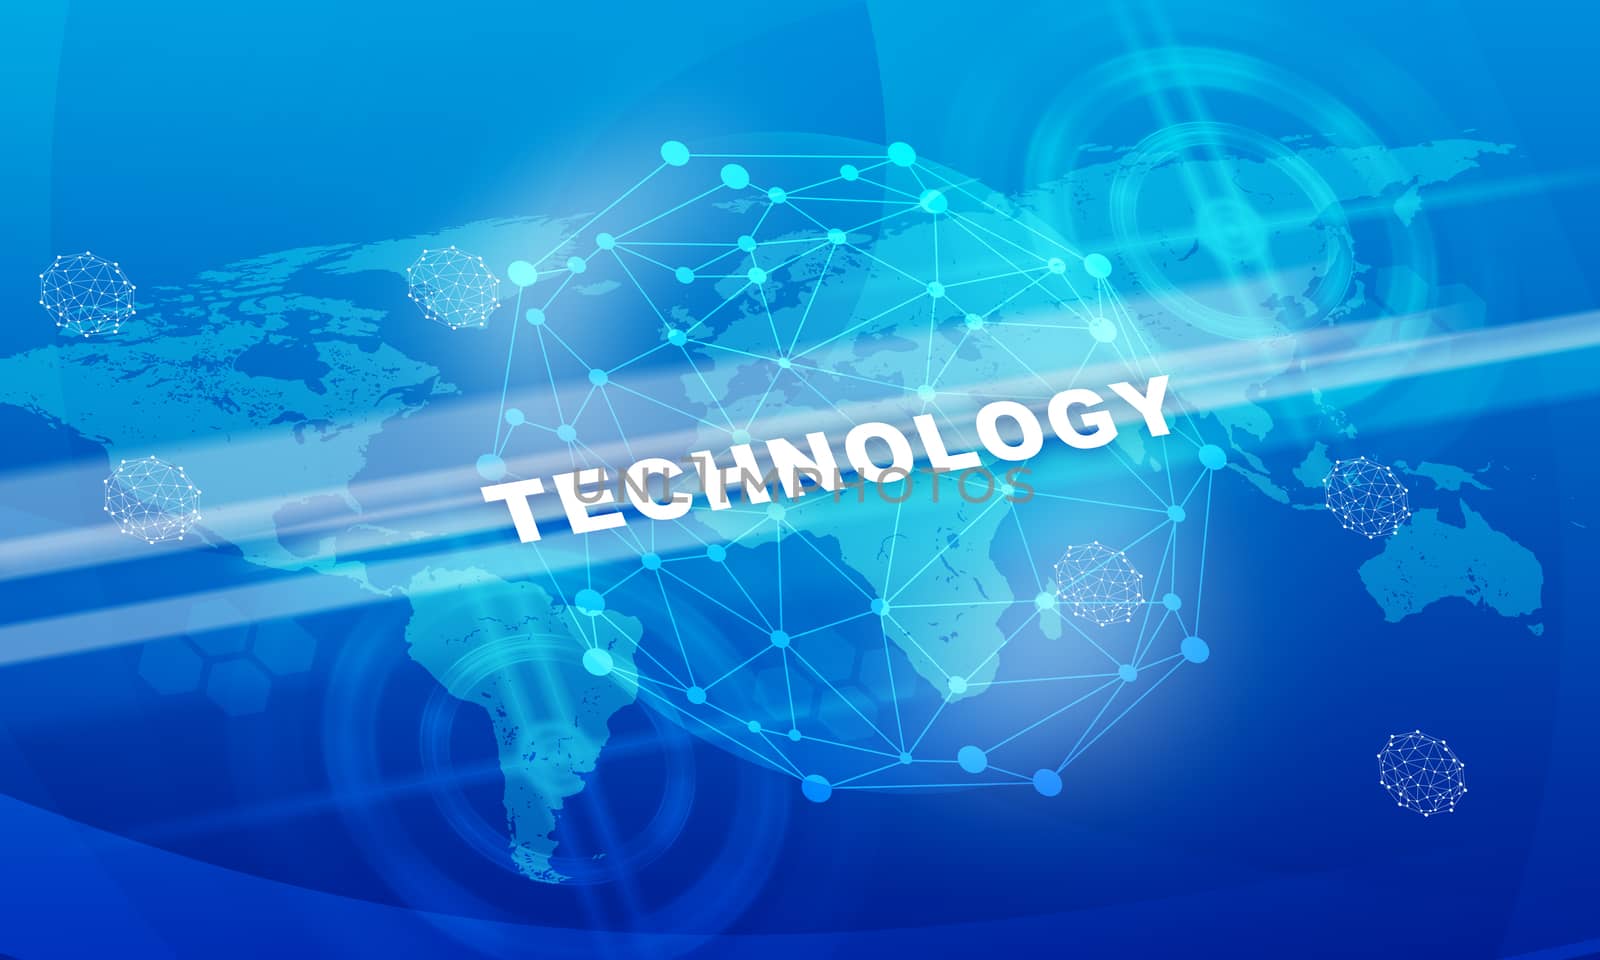 Technology word with world map on abstract blue background